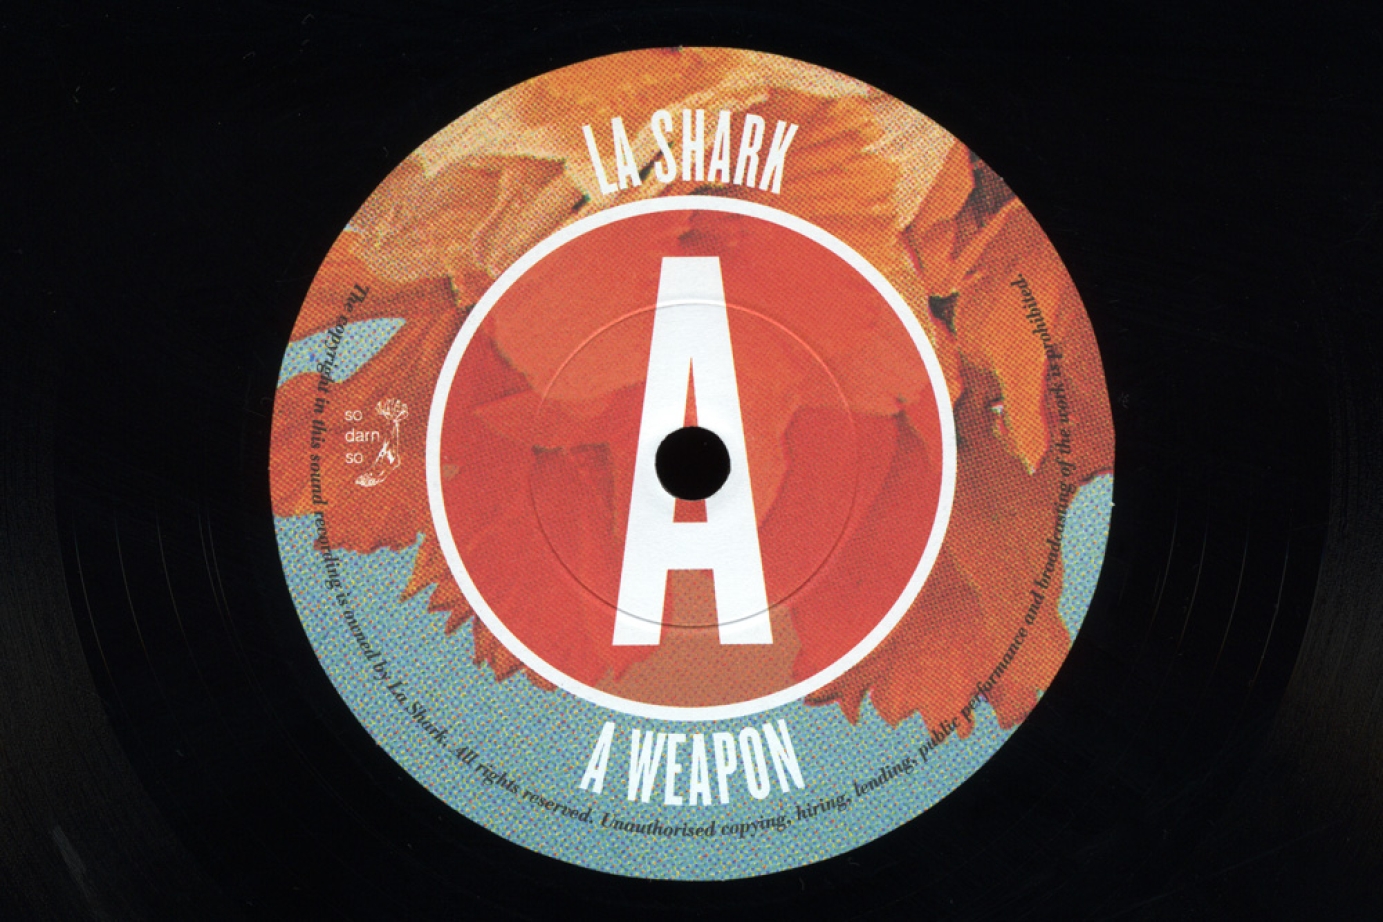 A Weapon EP Cover